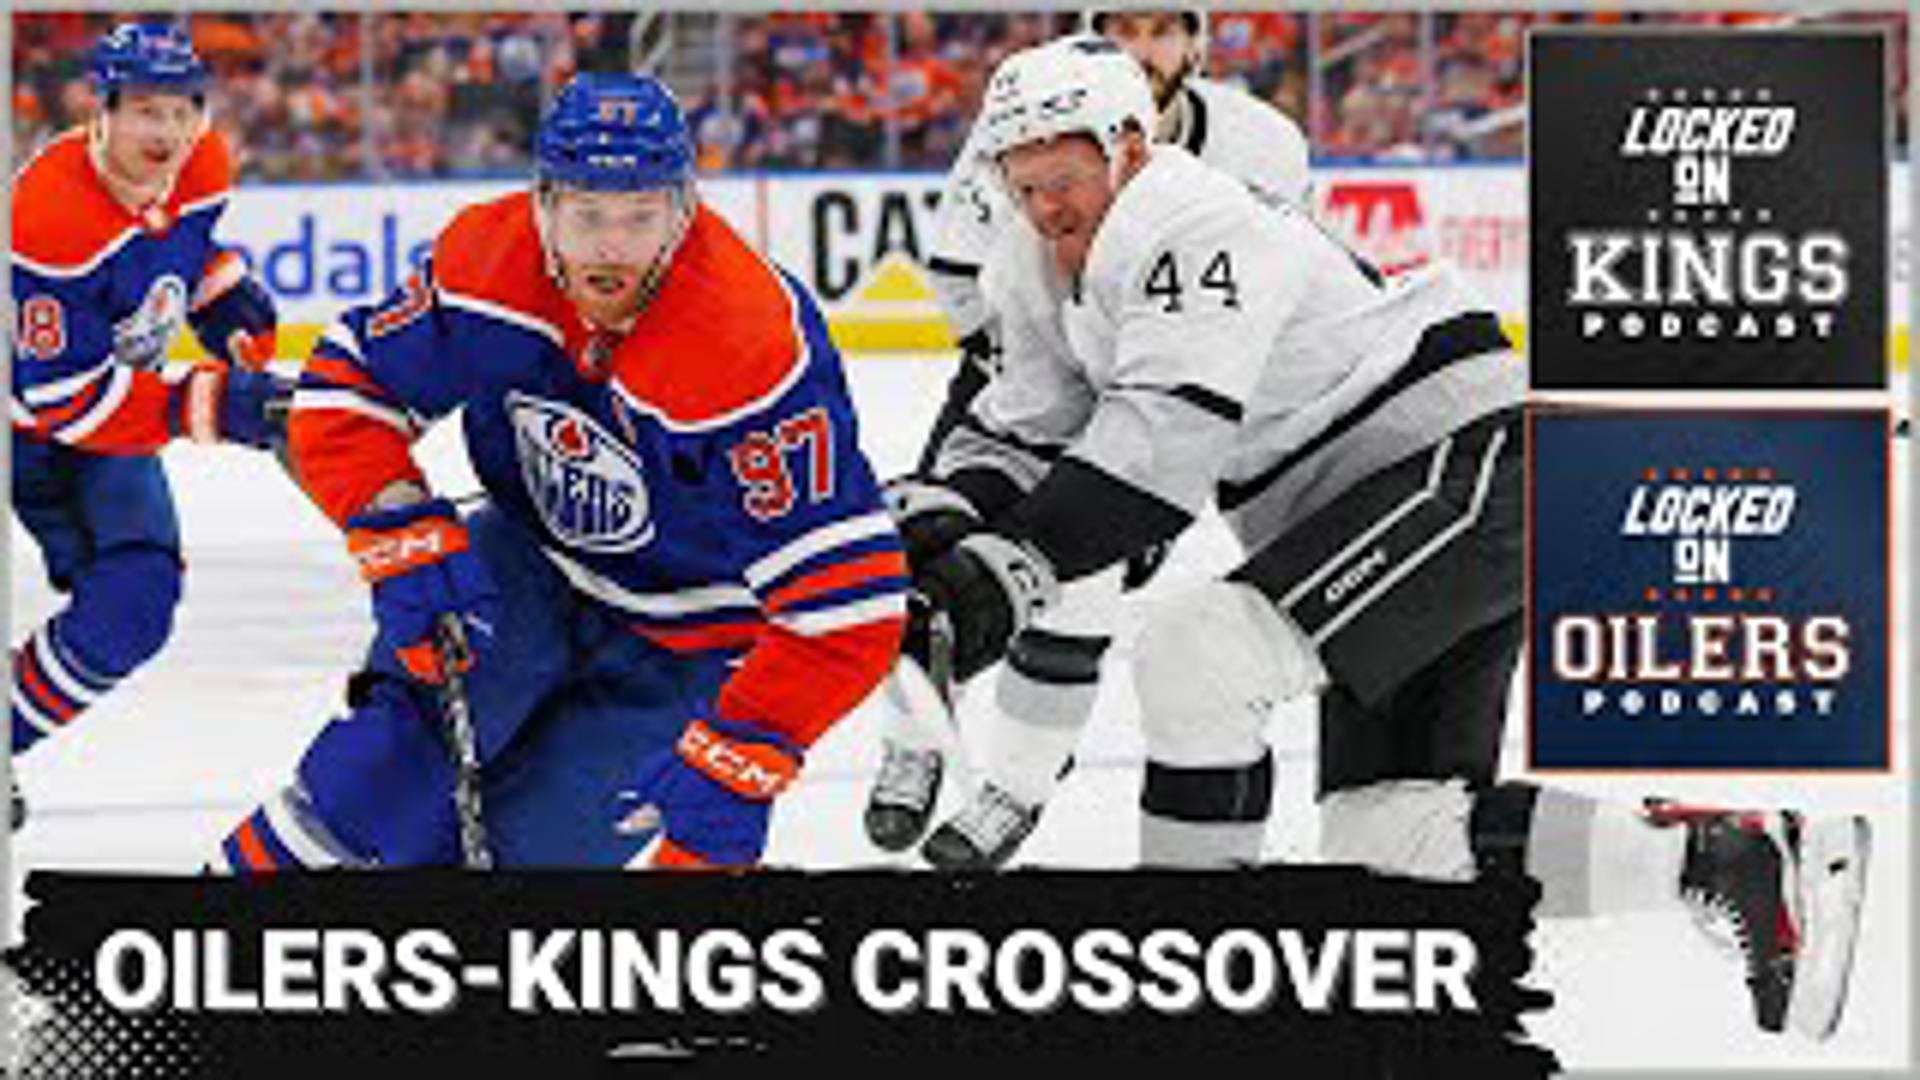 The Stanley Cup playoffs are through 4 games for the LA Kings and Edmonton Oilers. On this special crossover episode Nick Zararis joins to talk about the series.